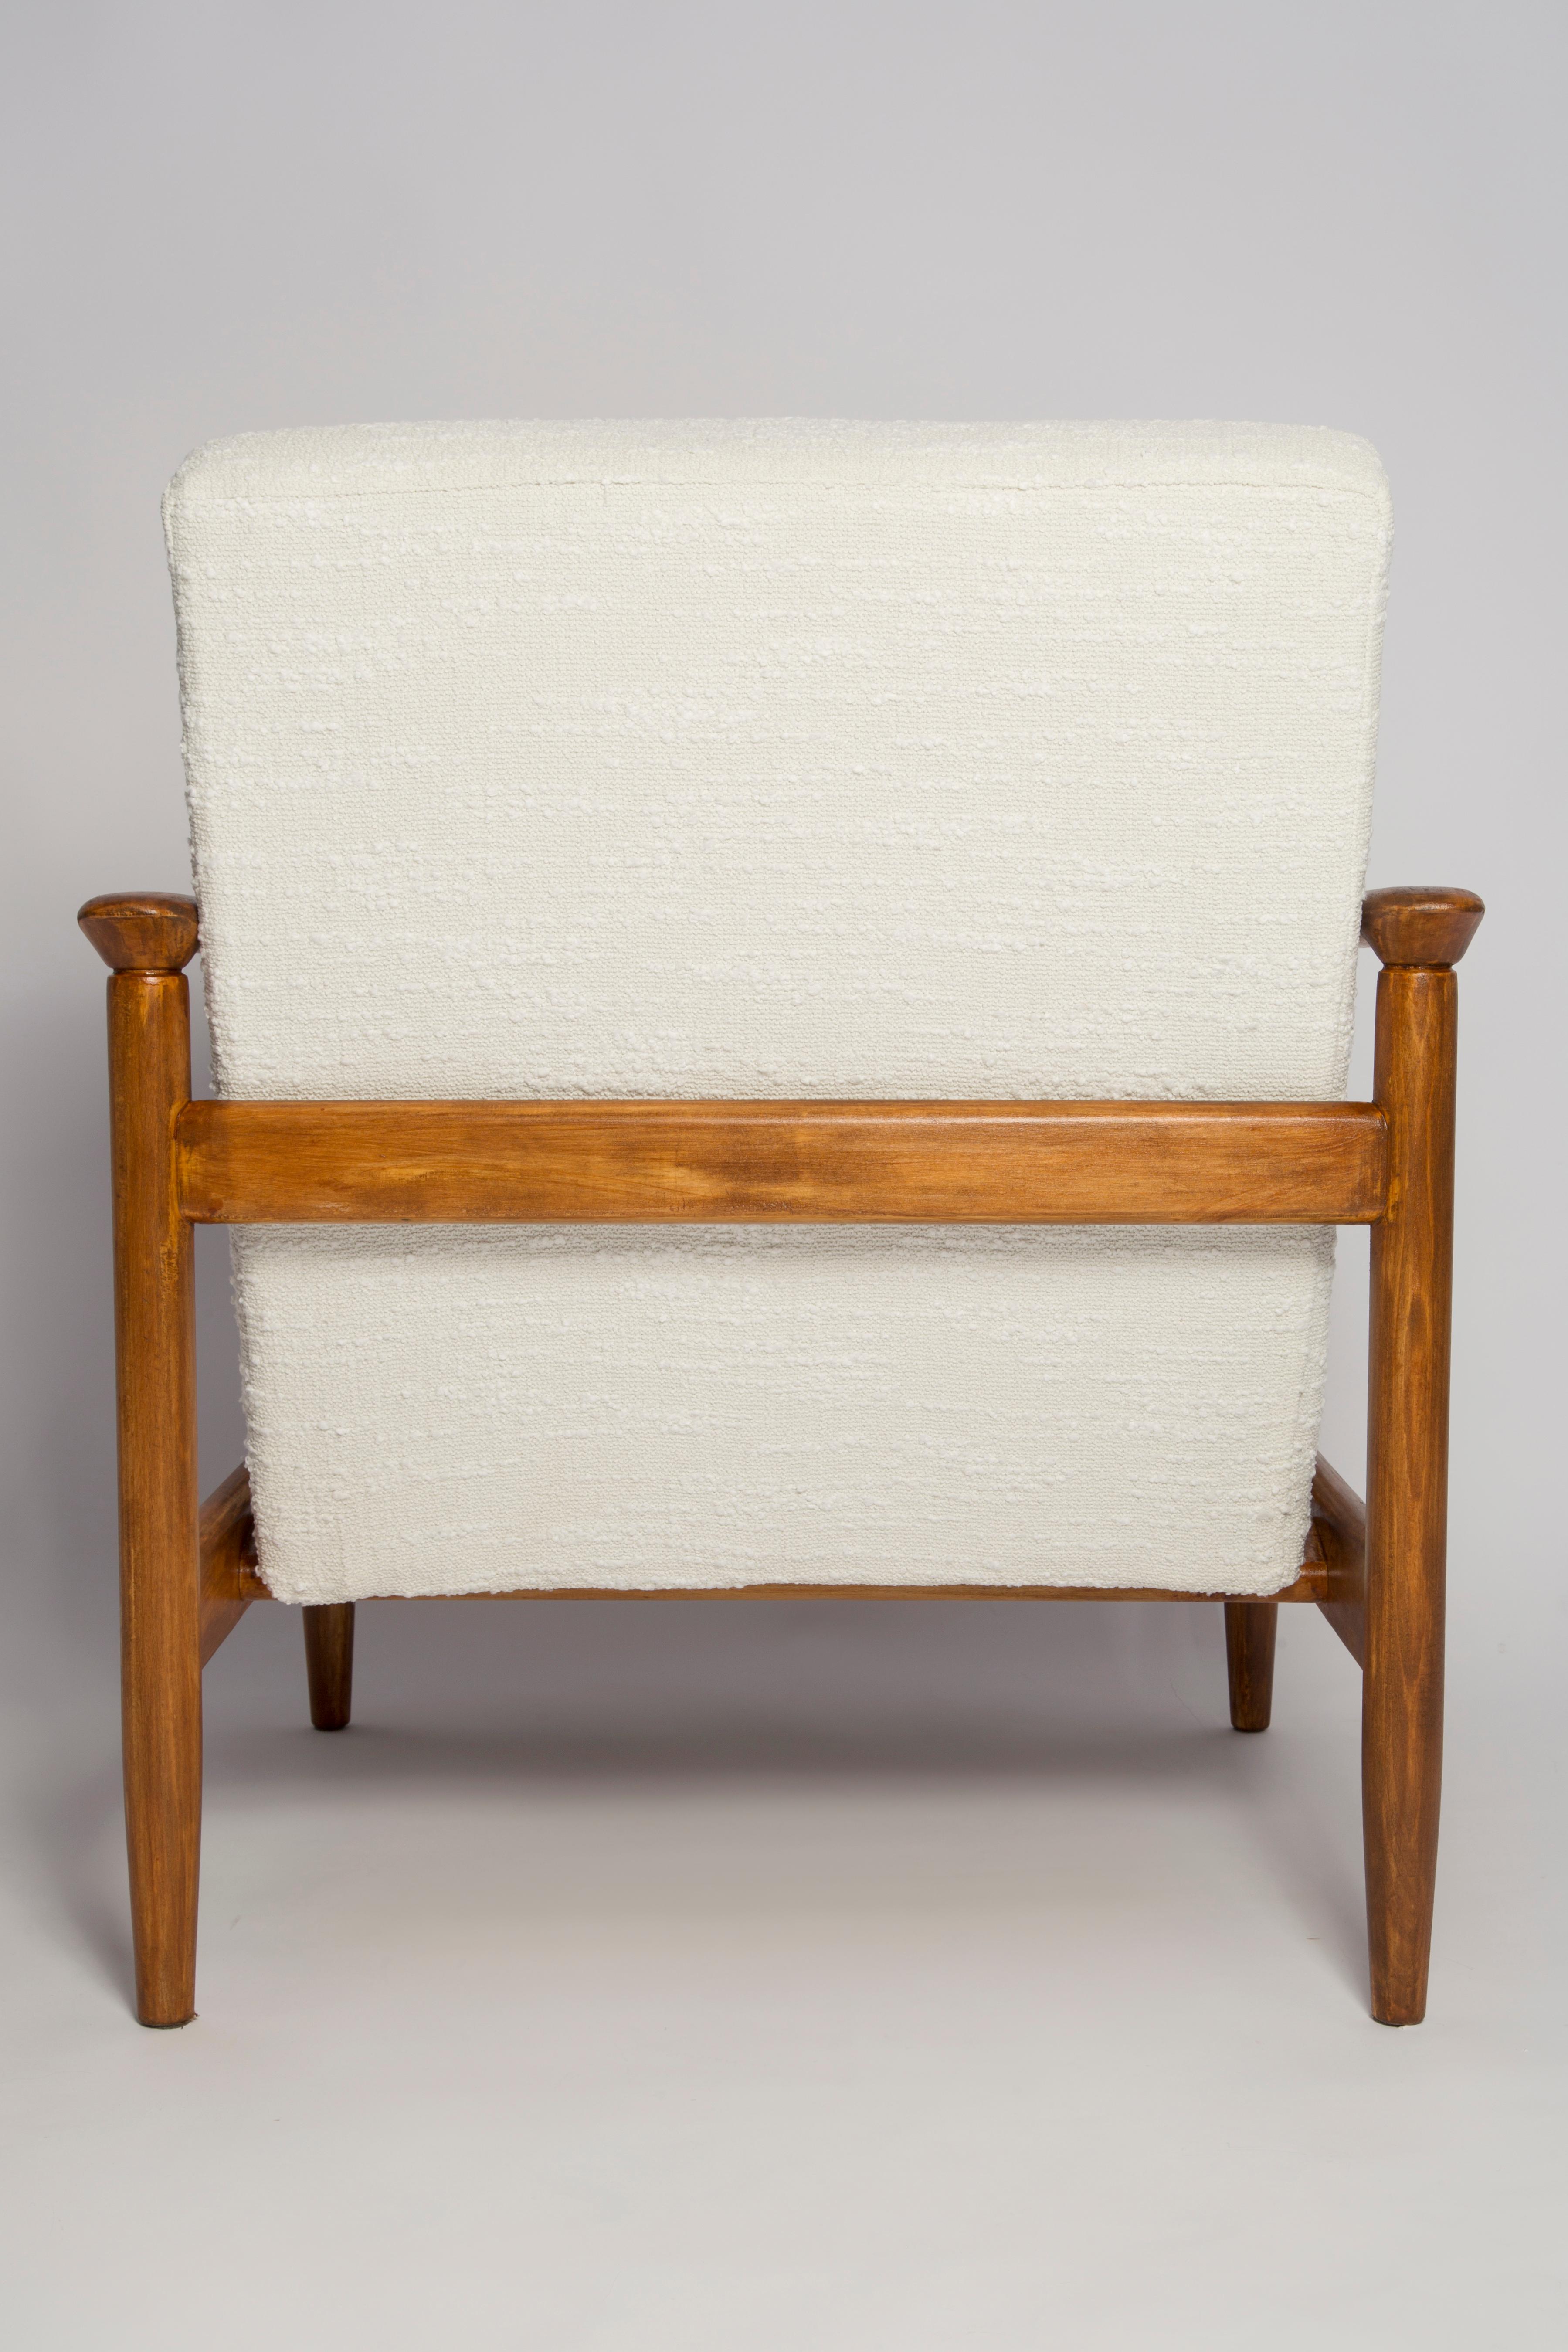 Pair of Mid Century White Boucle Armchairs, GFM 142, Edmund Homa, Europe, 1960s For Sale 4